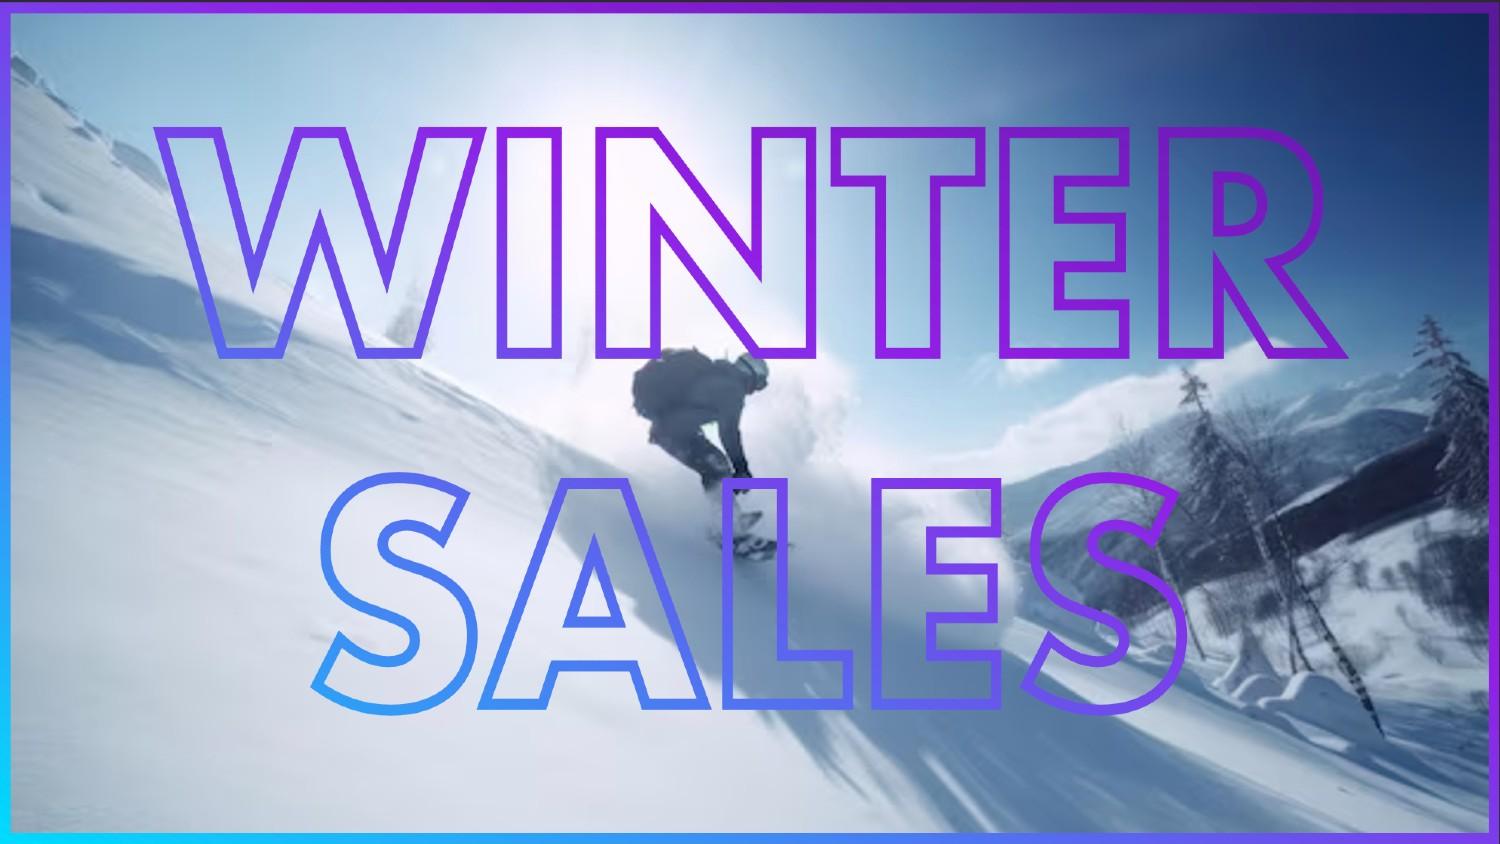 🏂❄️ Shred the slopes of savings with our Winter Sales! ☃️🏔️ - Weagorà